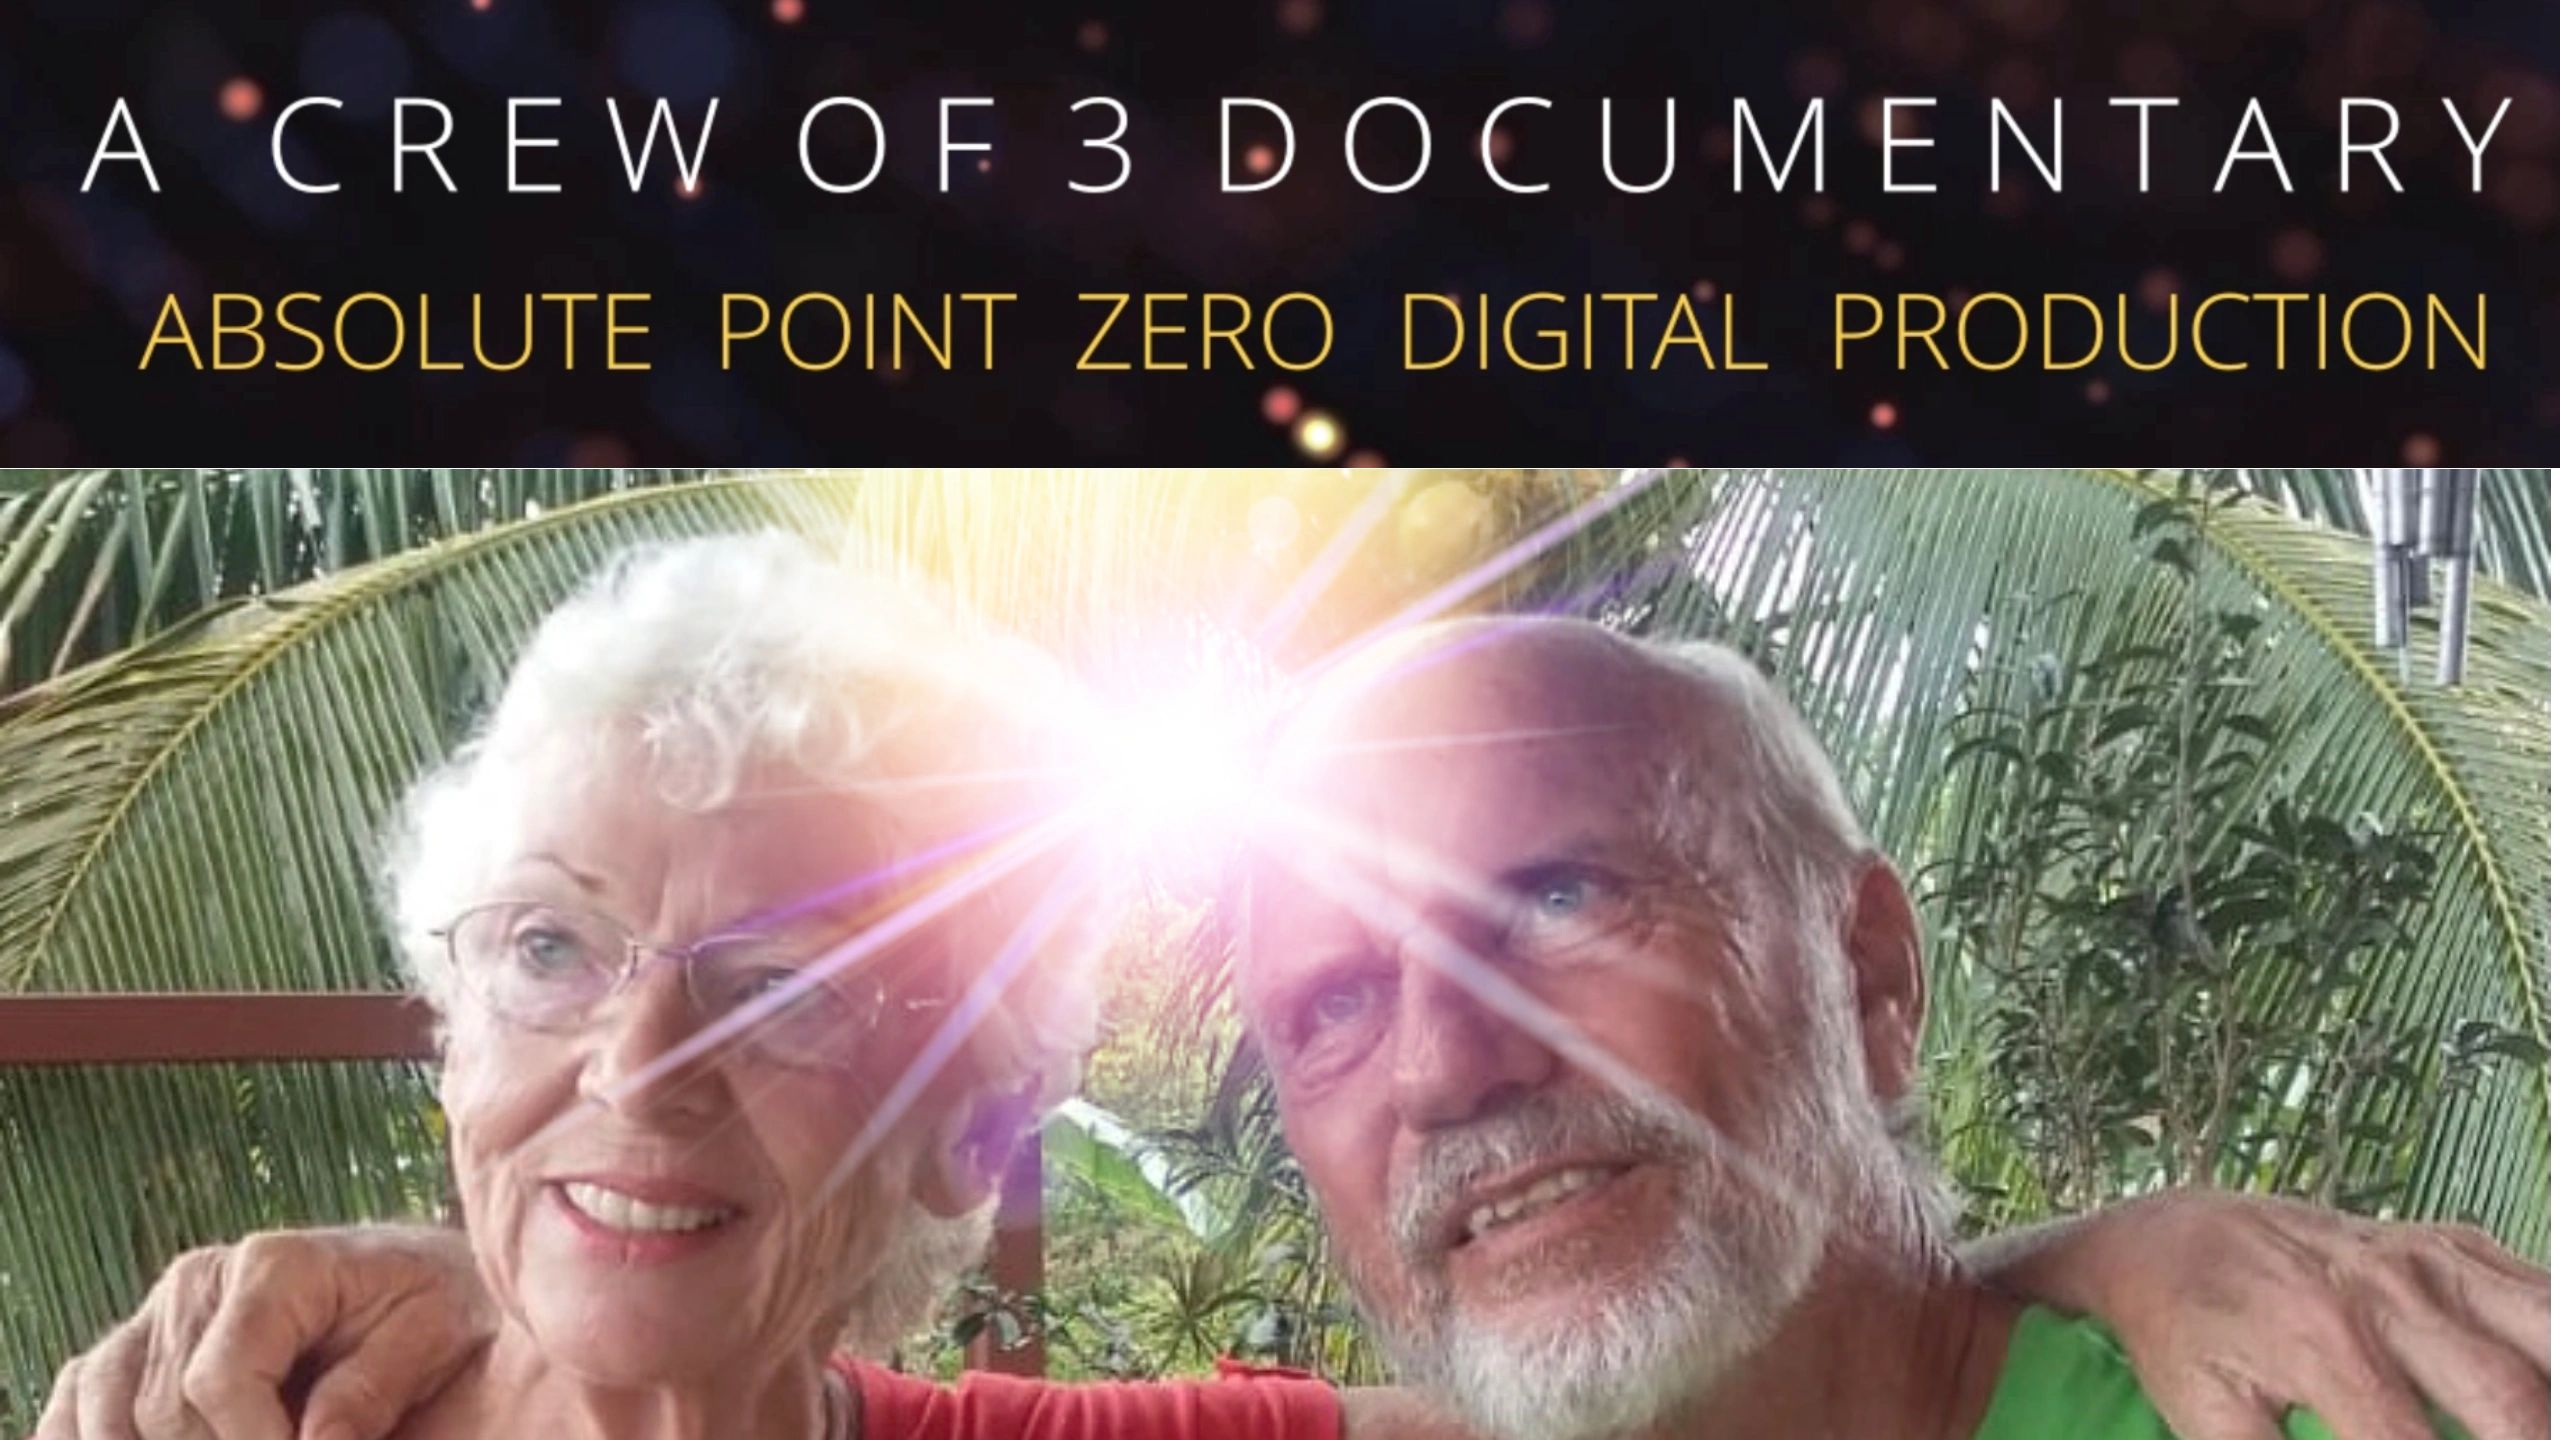 Free documentaries to empower minds.